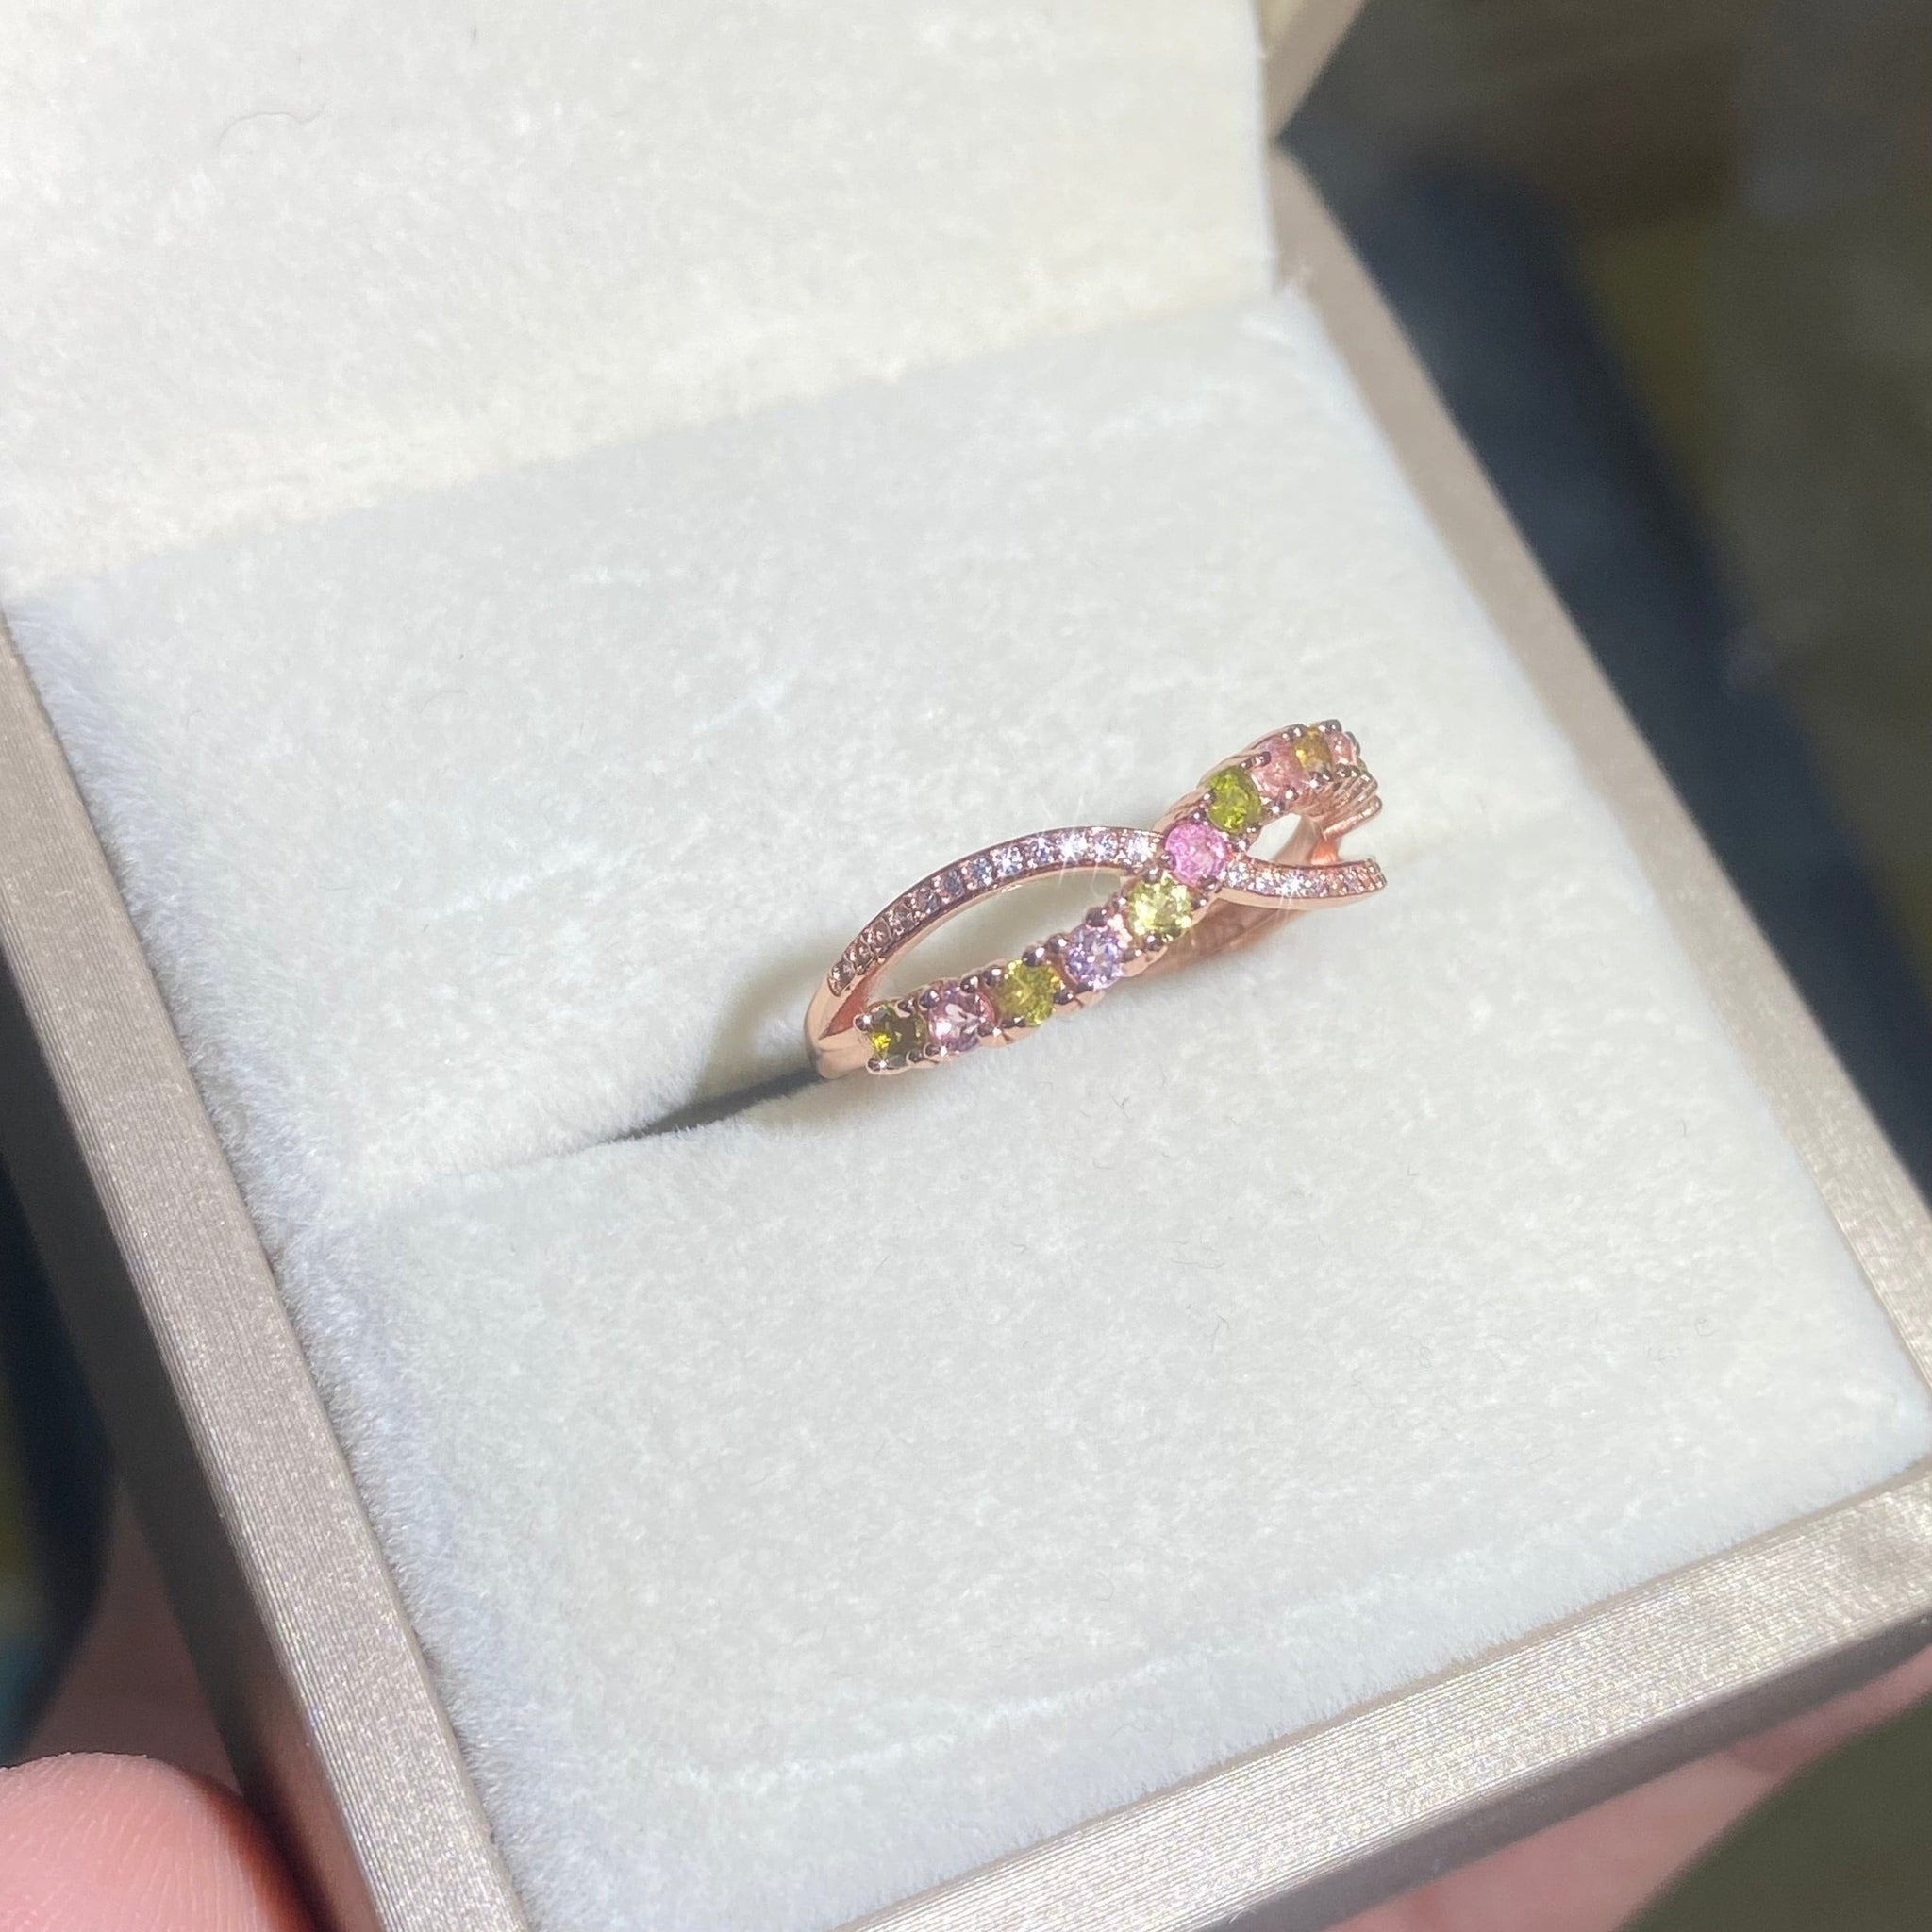 S925 Sterling Silver Natural Tourmaline Wave Ring.